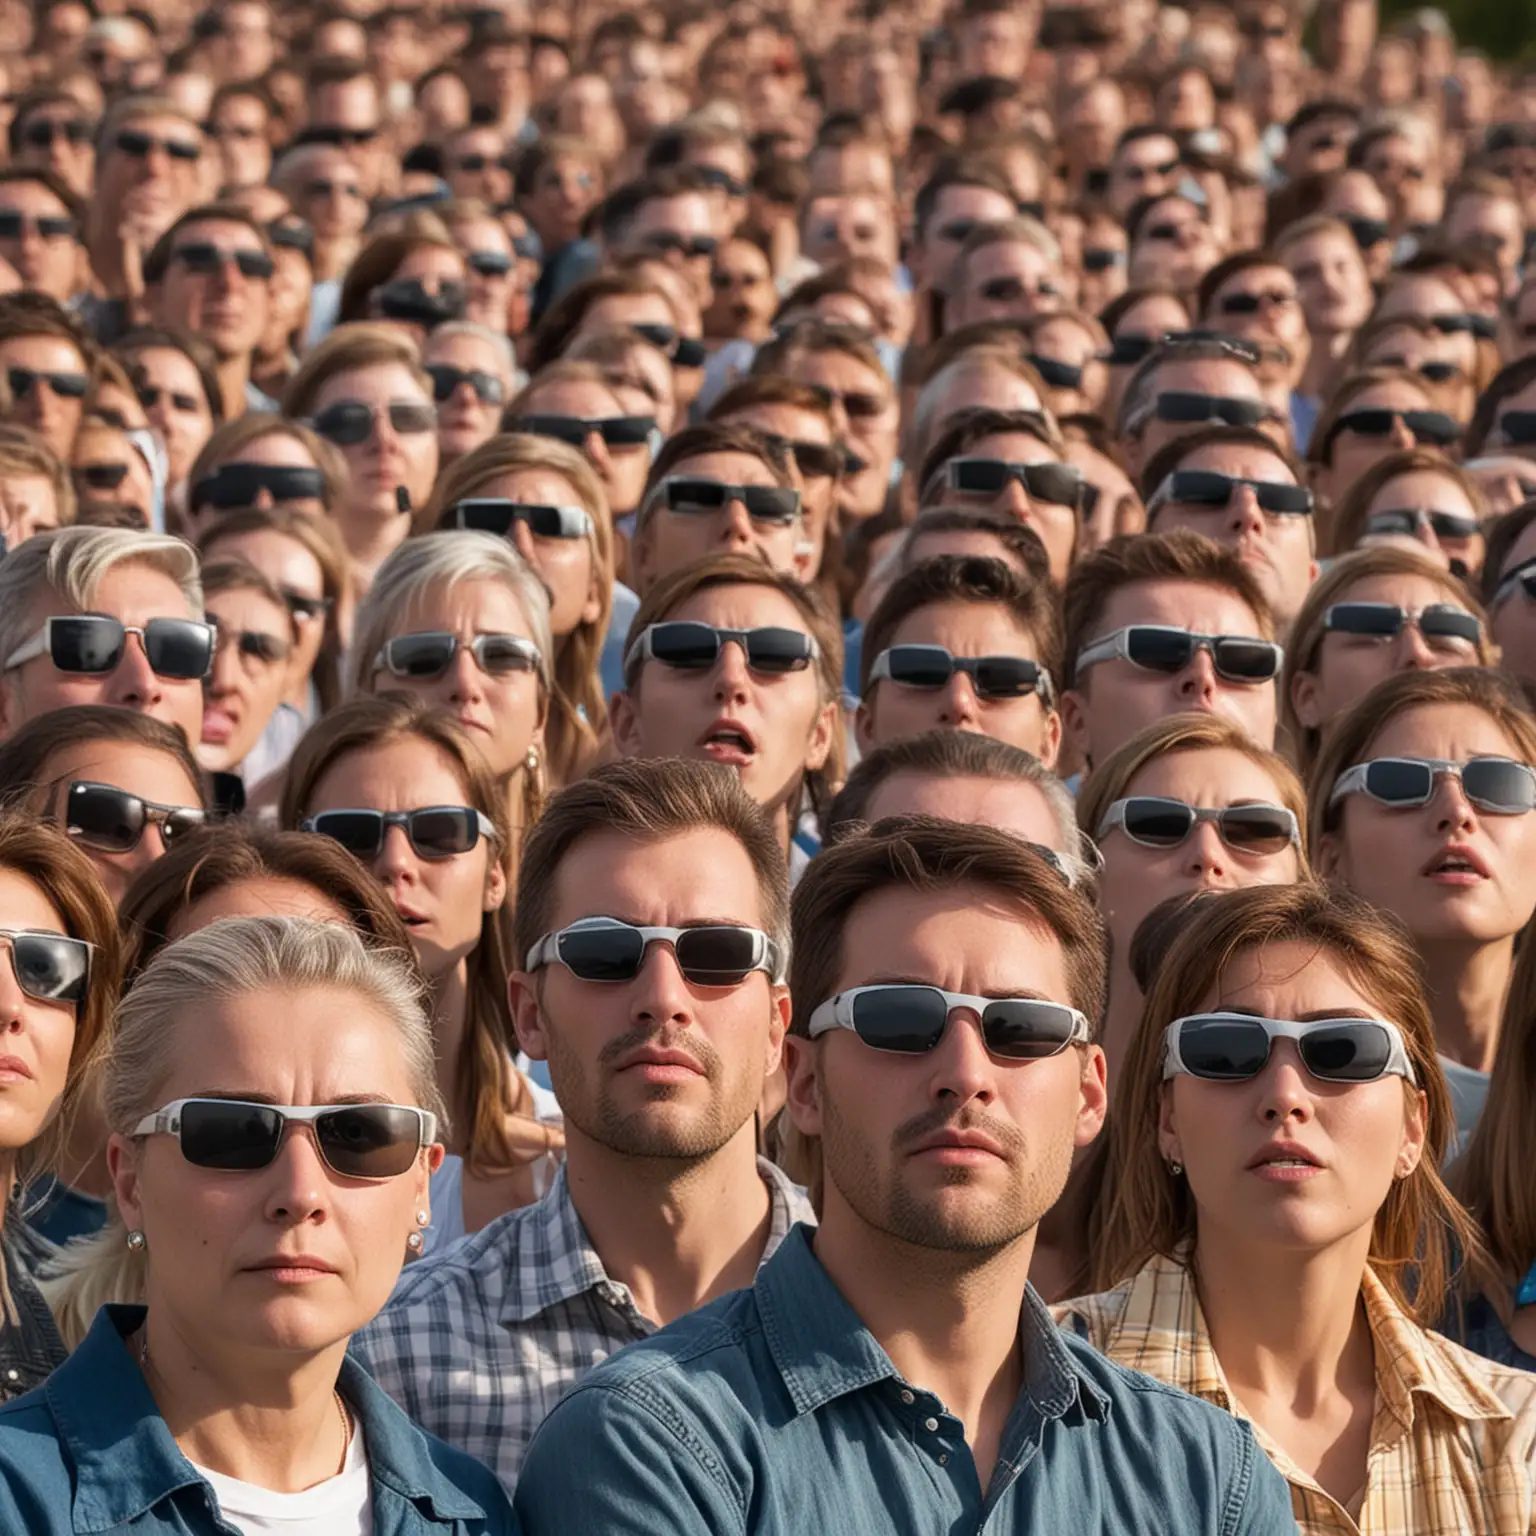 Eclipse Watchers with Surreal Gaze